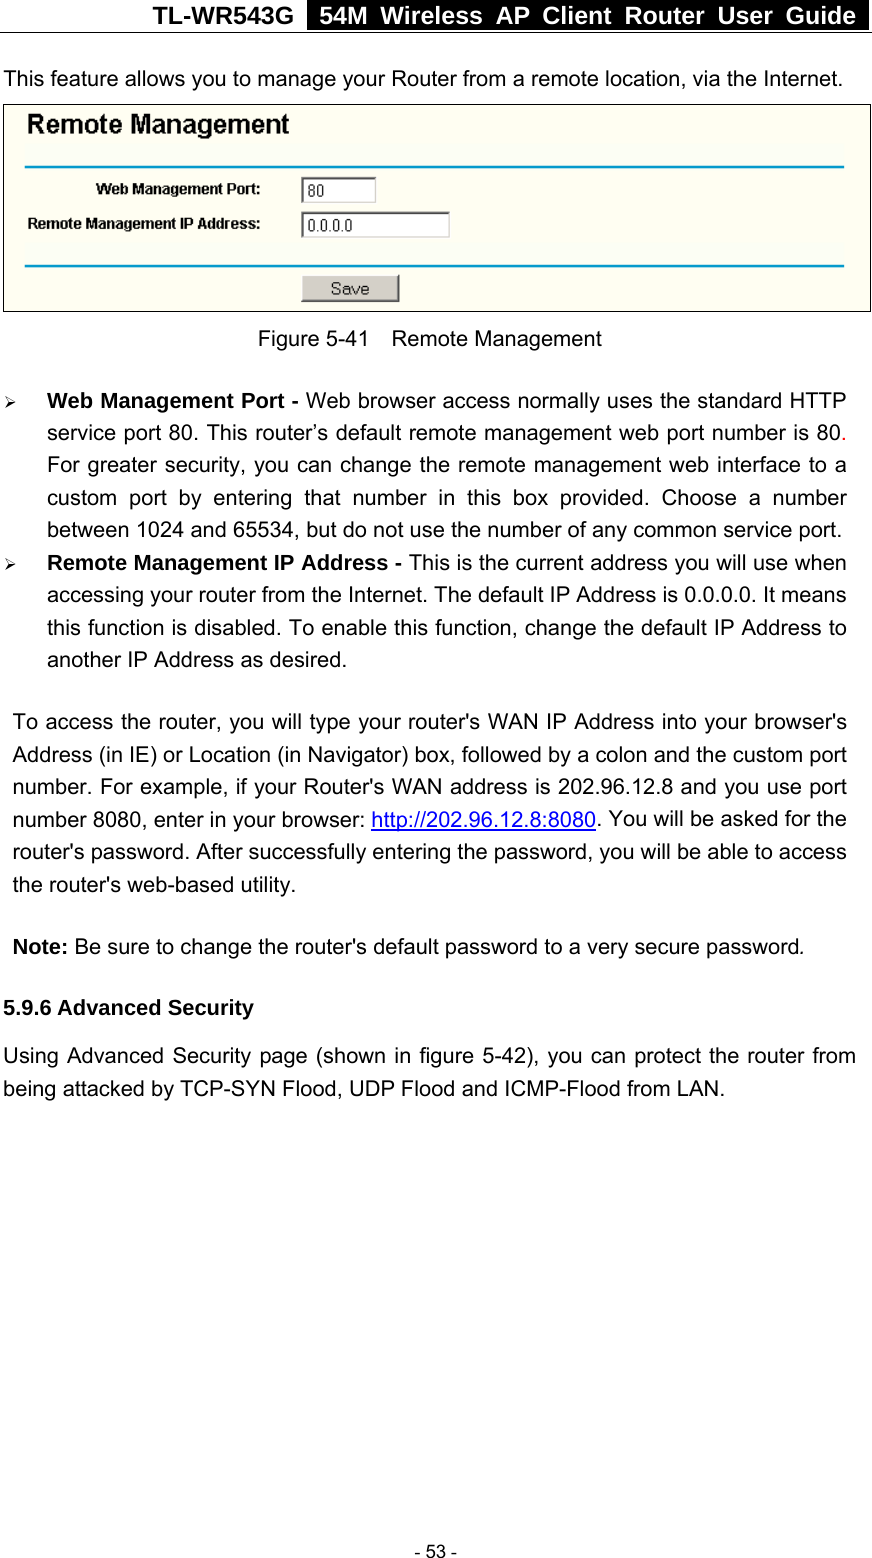 TL-WR543G   54M Wireless AP Client Router User Guide  This feature allows you to manage your Router from a remote location, via the Internet.   Figure 5-41  Remote Management ¾ Web Management Port - Web browser access normally uses the standard HTTP service port 80. This router’s default remote management web port number is 80. For greater security, you can change the remote management web interface to a custom port by entering that number in this box provided. Choose a number between 1024 and 65534, but do not use the number of any common service port. ¾ Remote Management IP Address - This is the current address you will use when accessing your router from the Internet. The default IP Address is 0.0.0.0. It means this function is disabled. To enable this function, change the default IP Address to another IP Address as desired.   To access the router, you will type your router&apos;s WAN IP Address into your browser&apos;s Address (in IE) or Location (in Navigator) box, followed by a colon and the custom port number. For example, if your Router&apos;s WAN address is 202.96.12.8 and you use port number 8080, enter in your browser: http://202.96.12.8:8080. You will be asked for the router&apos;s password. After successfully entering the password, you will be able to access the router&apos;s web-based utility. Note: Be sure to change the router&apos;s default password to a very secure password. 5.9.6 Advanced Security Using Advanced Security page (shown in figure 5-42), you can protect the router from being attacked by TCP-SYN Flood, UDP Flood and ICMP-Flood from LAN.  - 53 - 